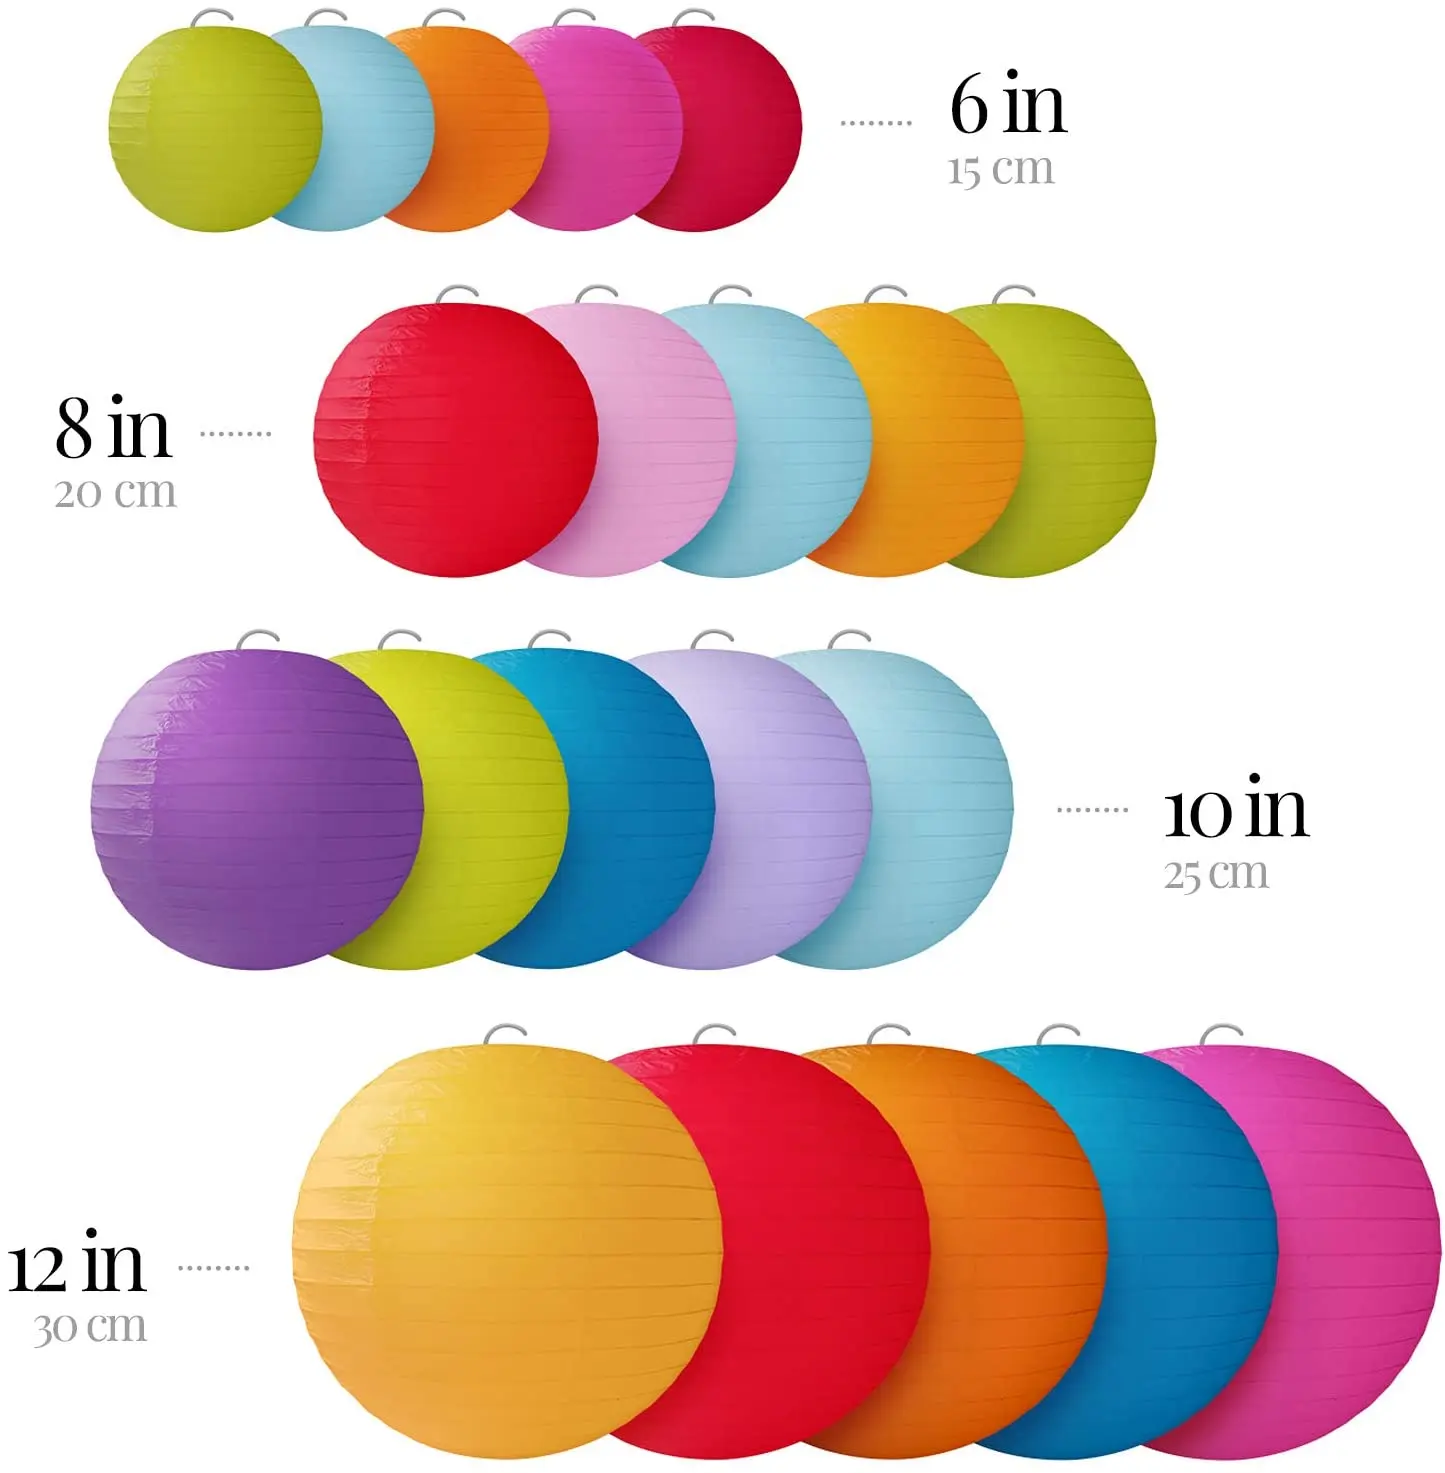 20 Colorful Paper Lanterns for Birthday Decorations Weddings Parties &  Events Round Hanging Paper Lanterns in Sizes 6